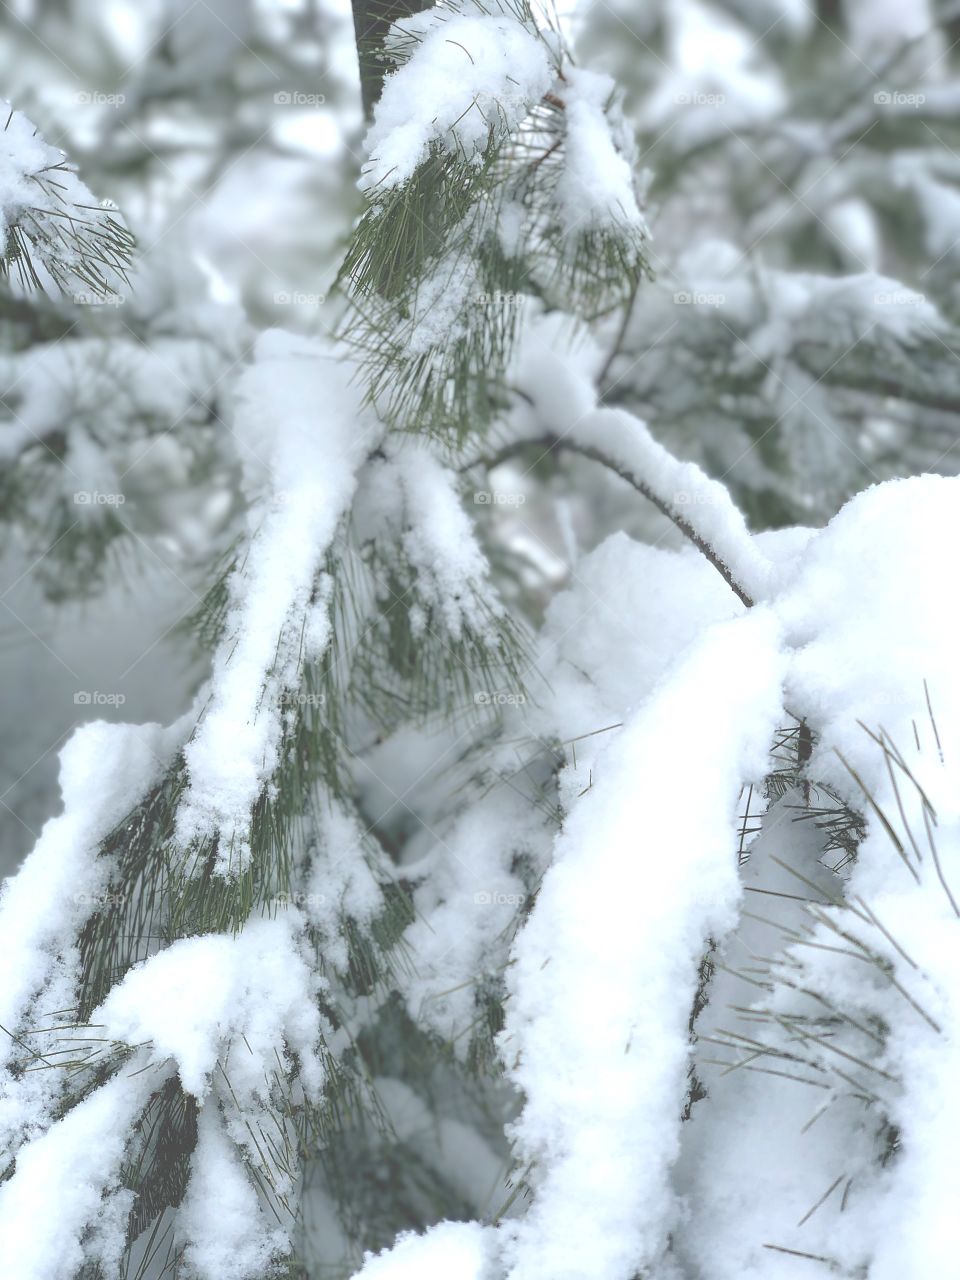 Snow covered pine